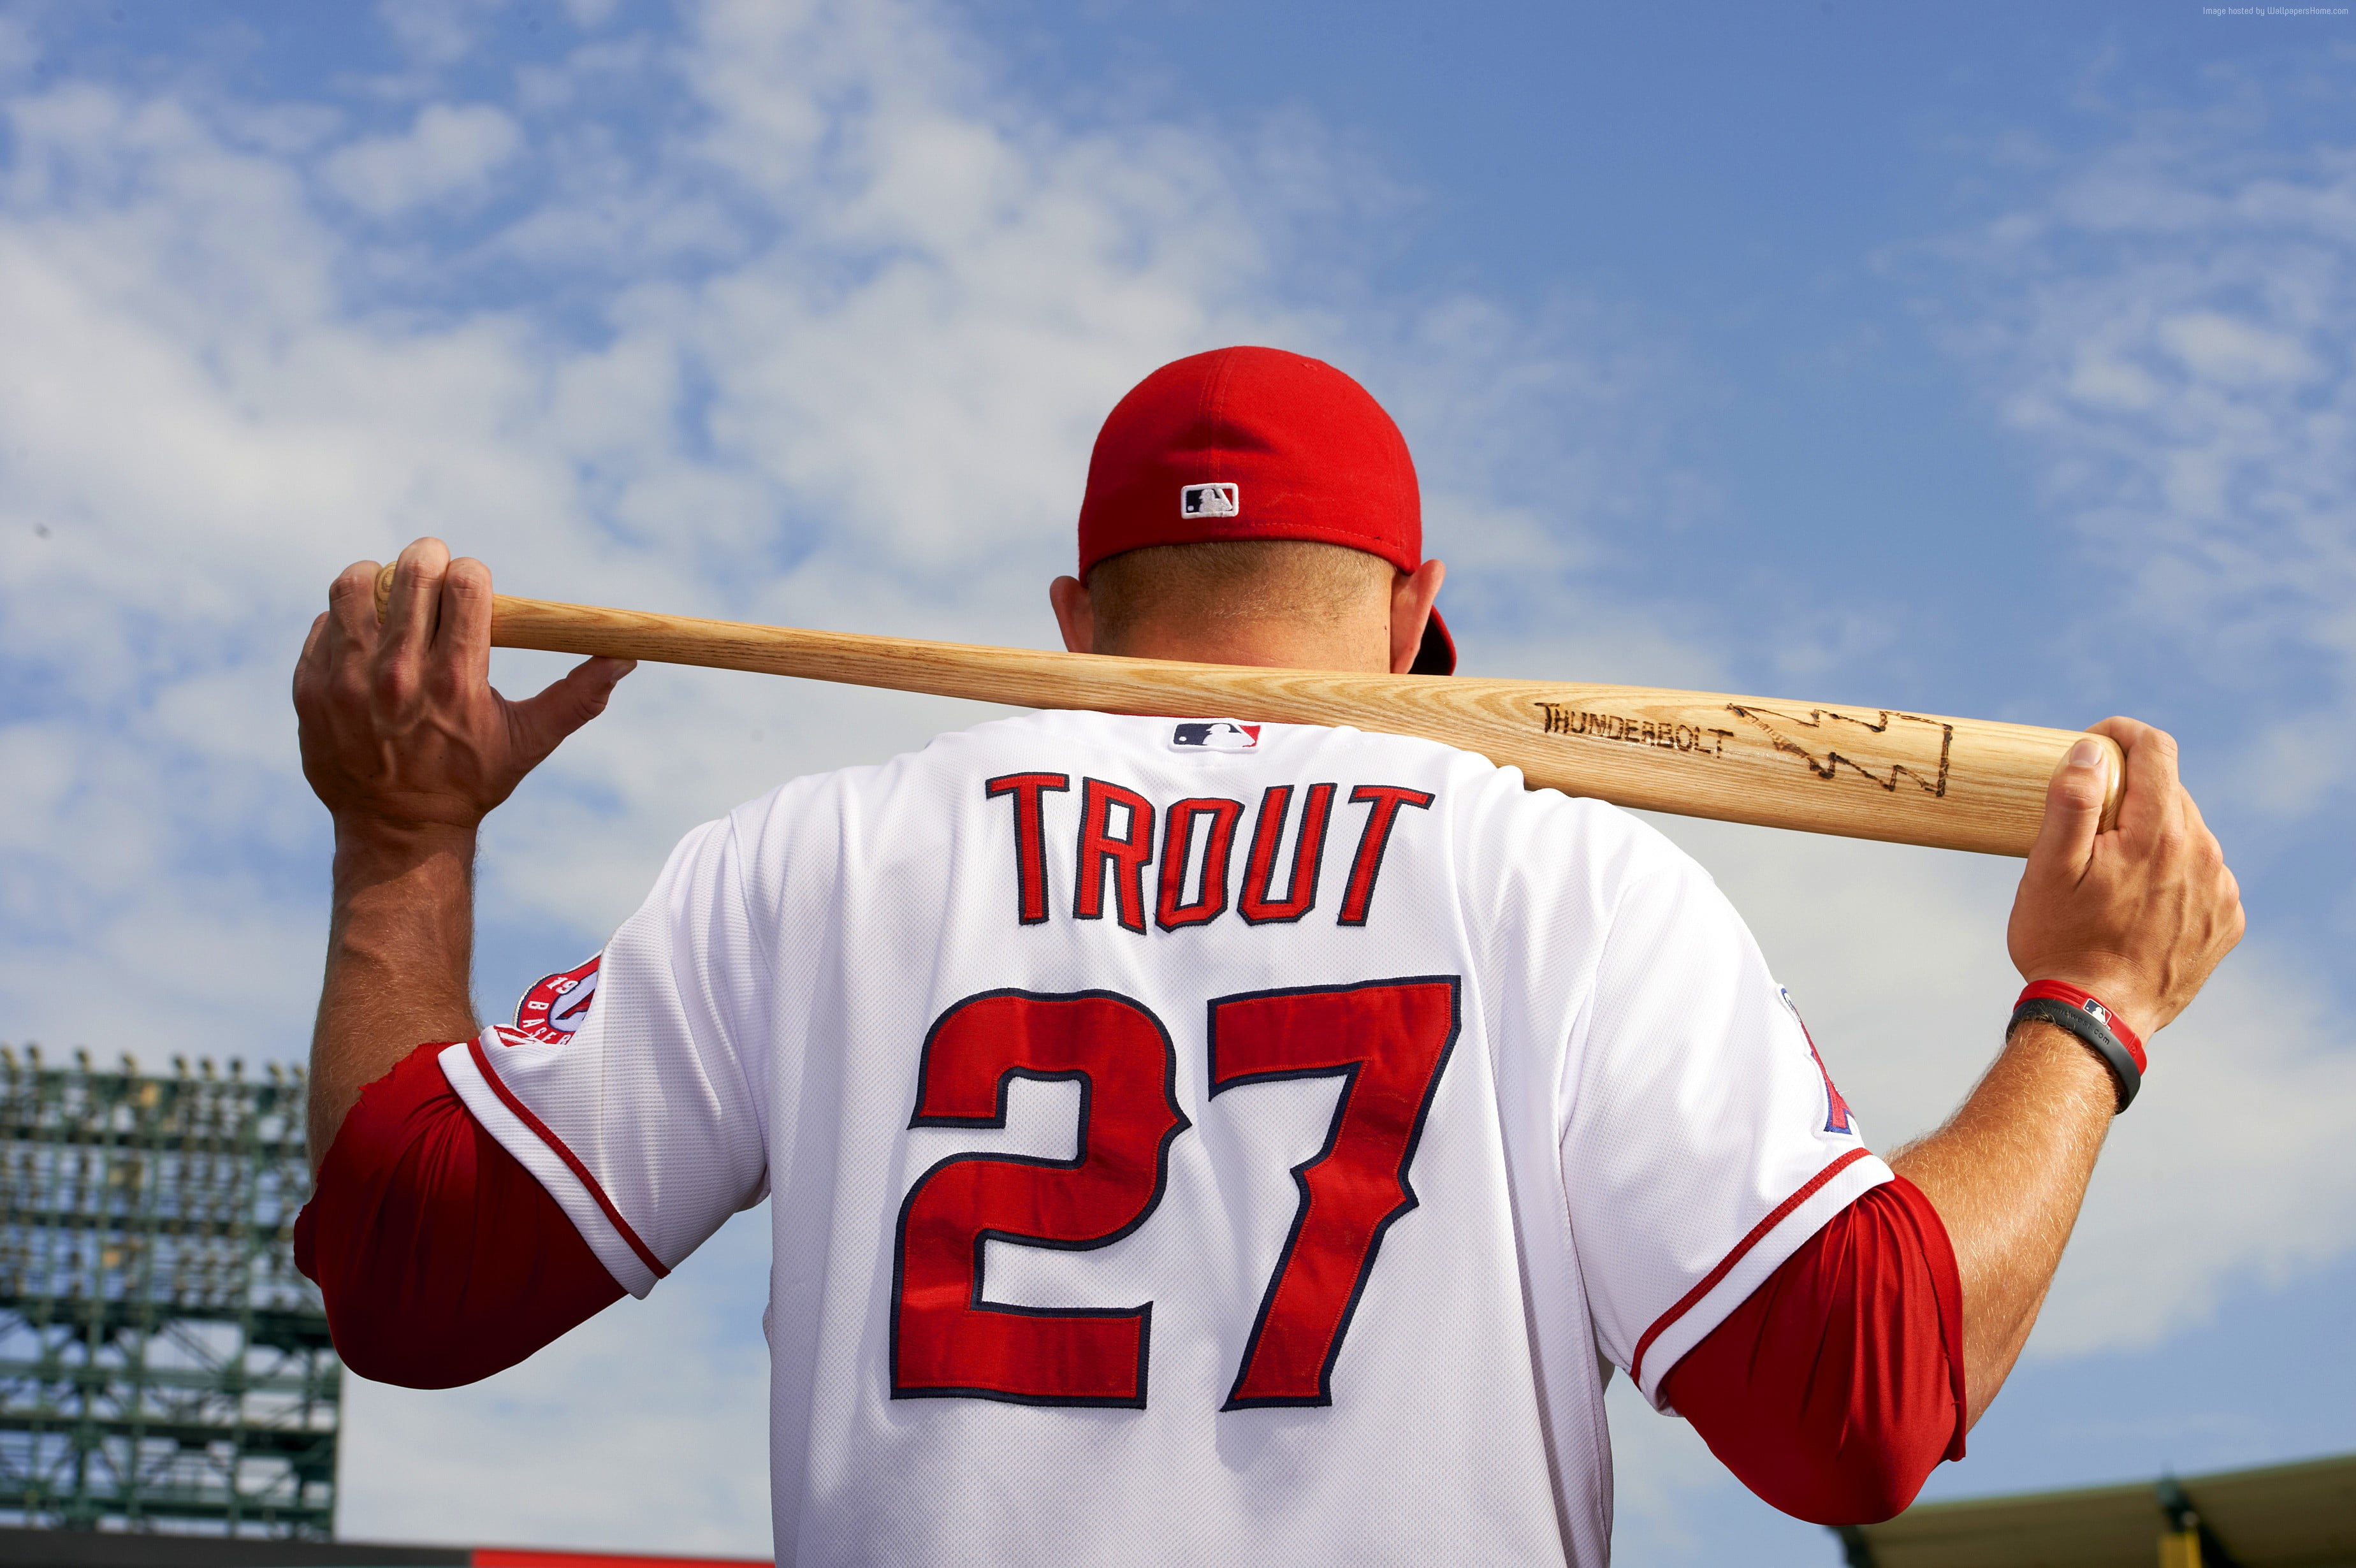 baseball-top-baseball-players-mike-trout-los-angeles-angels-of-anaheim-wallpaper.jpg